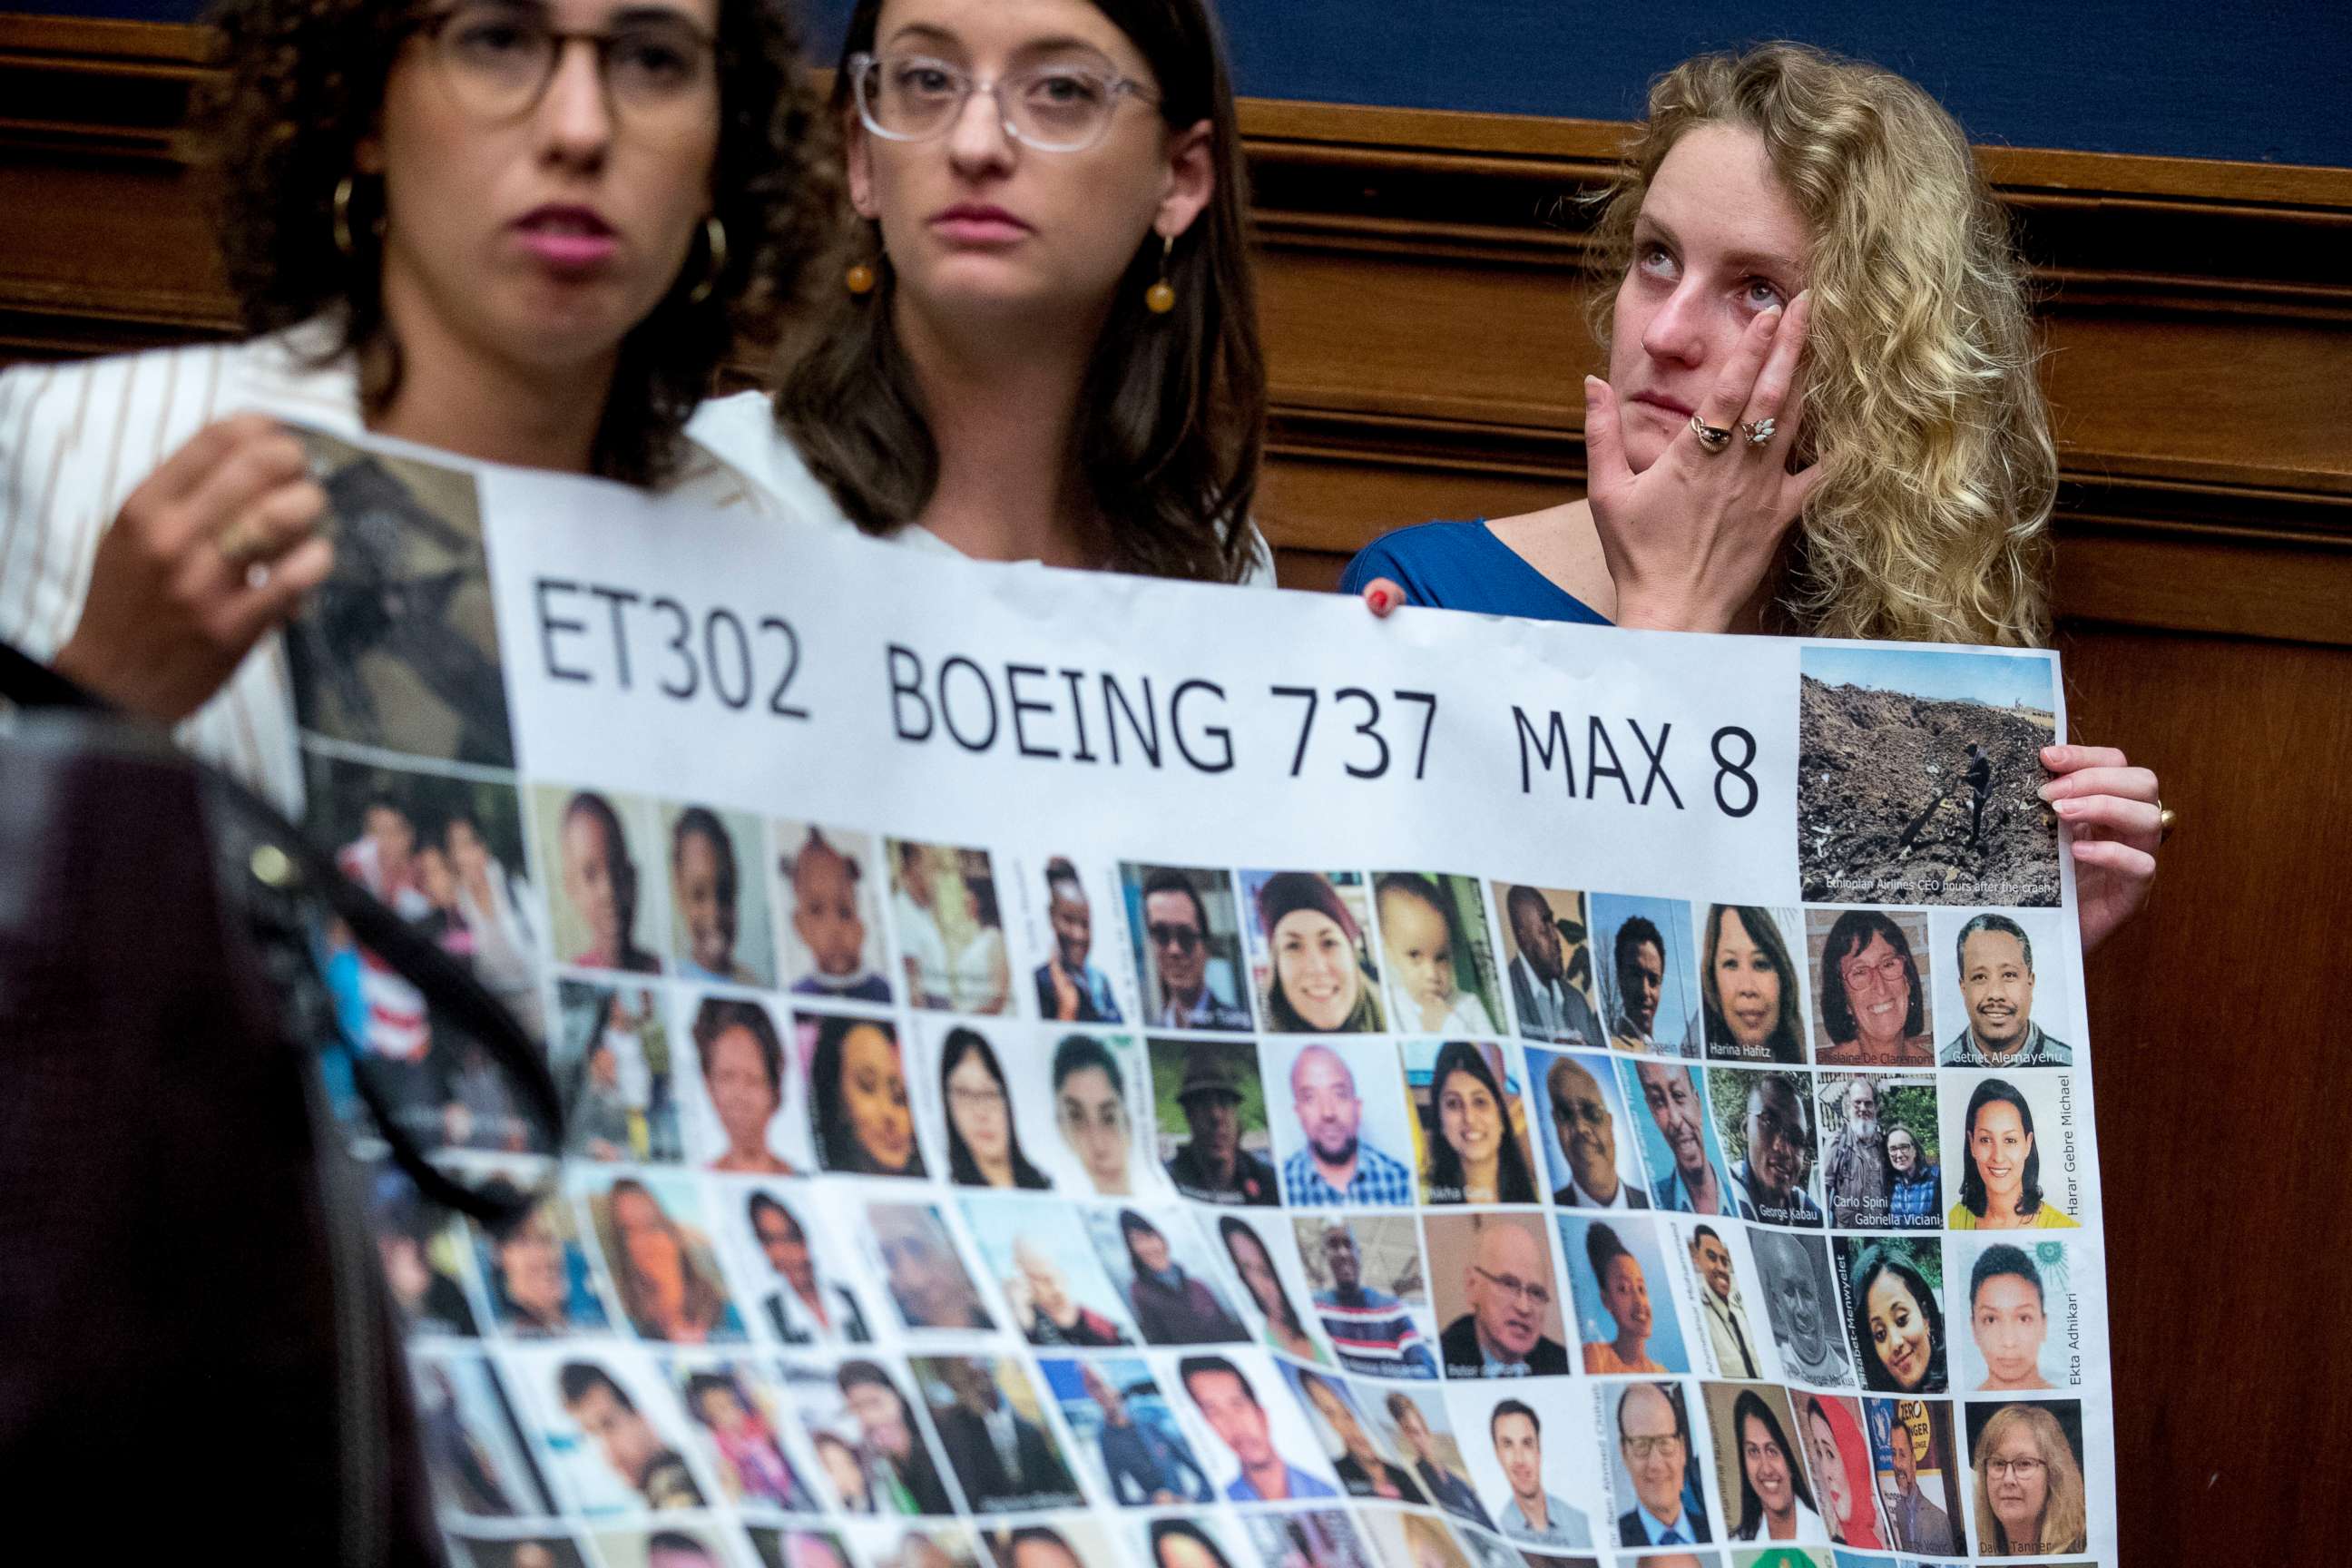 PHOTO: Friends of victim Samya Rose Stumo hold a sign depicting those lost in Ethiopian Airlines Flight 302 during a House Committee hearing on the status of the Boeing 737 MAX on Capitol Hill in Washington, June 19, 2019.